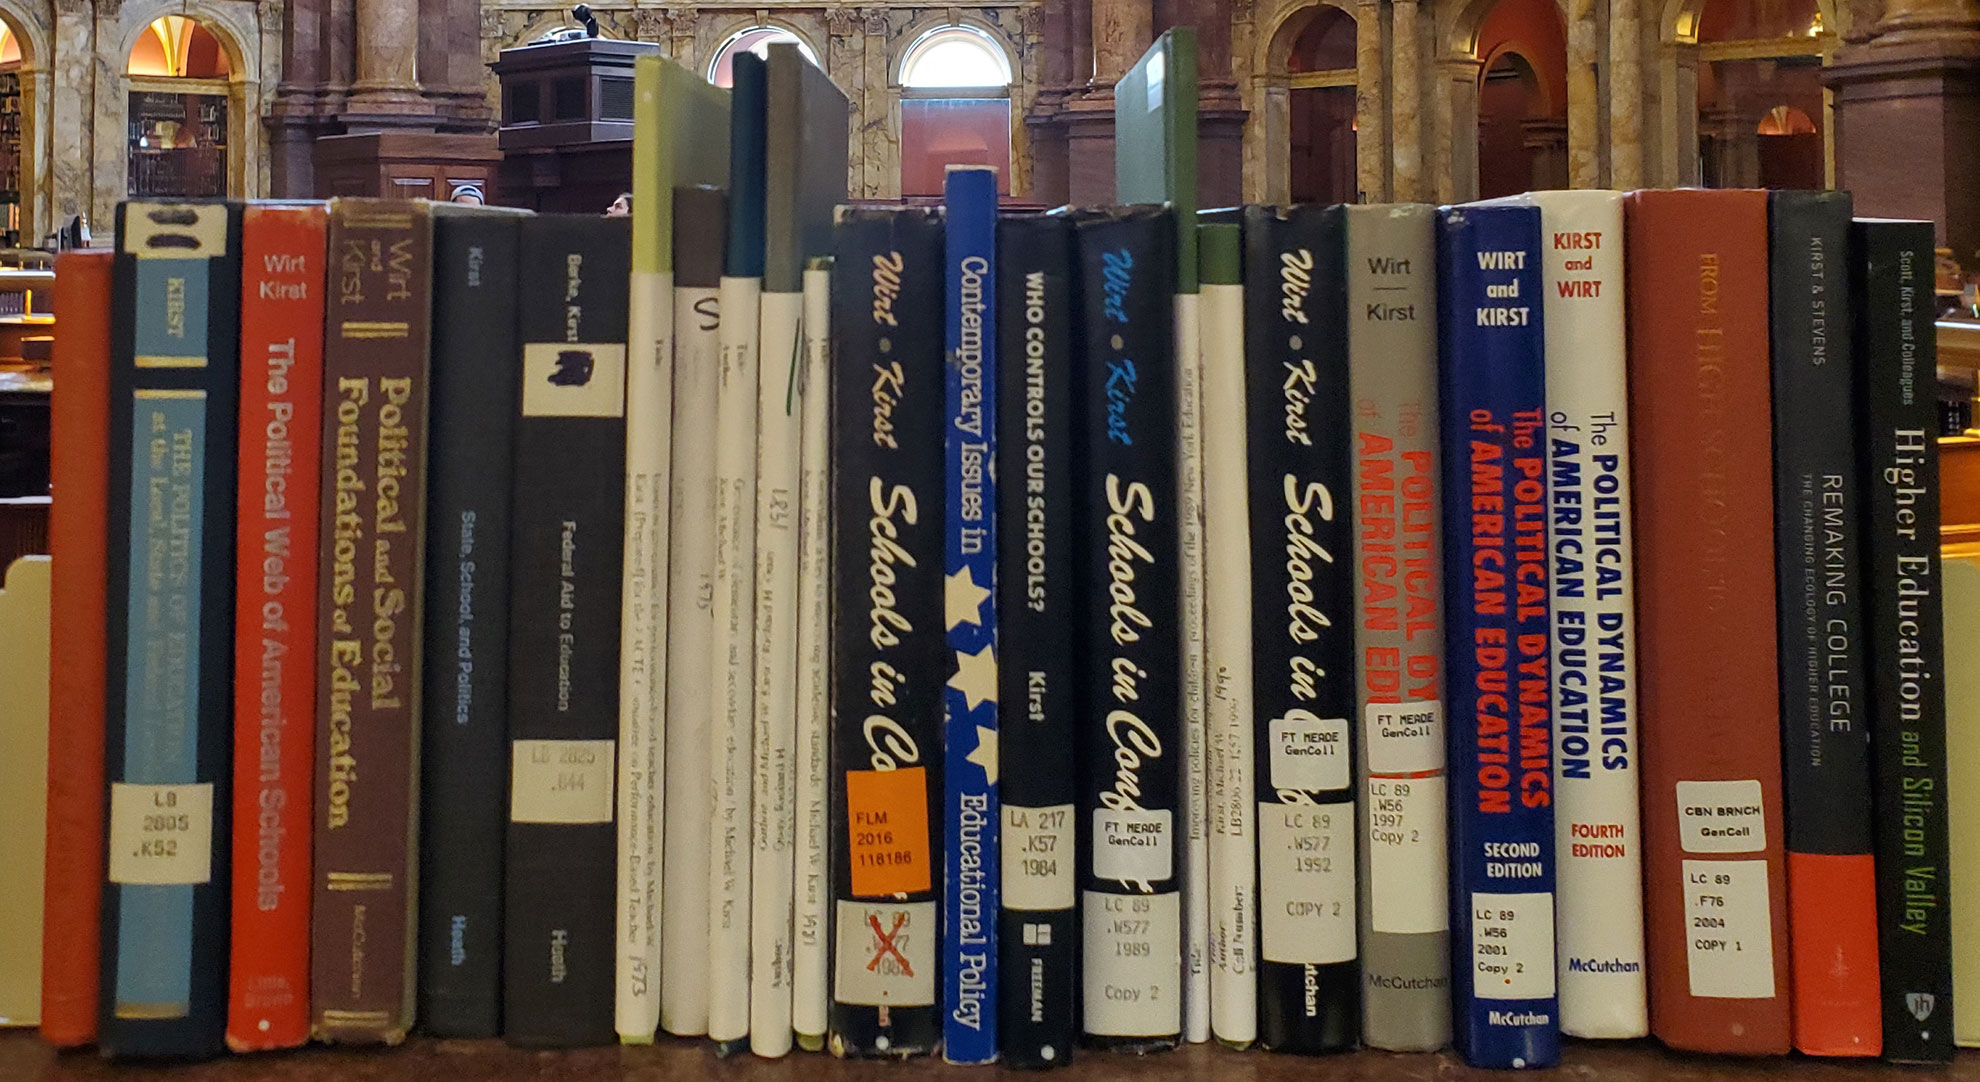 Book Collection of Stanford Professor Emeritus Mike Kirst Books Library of Congress